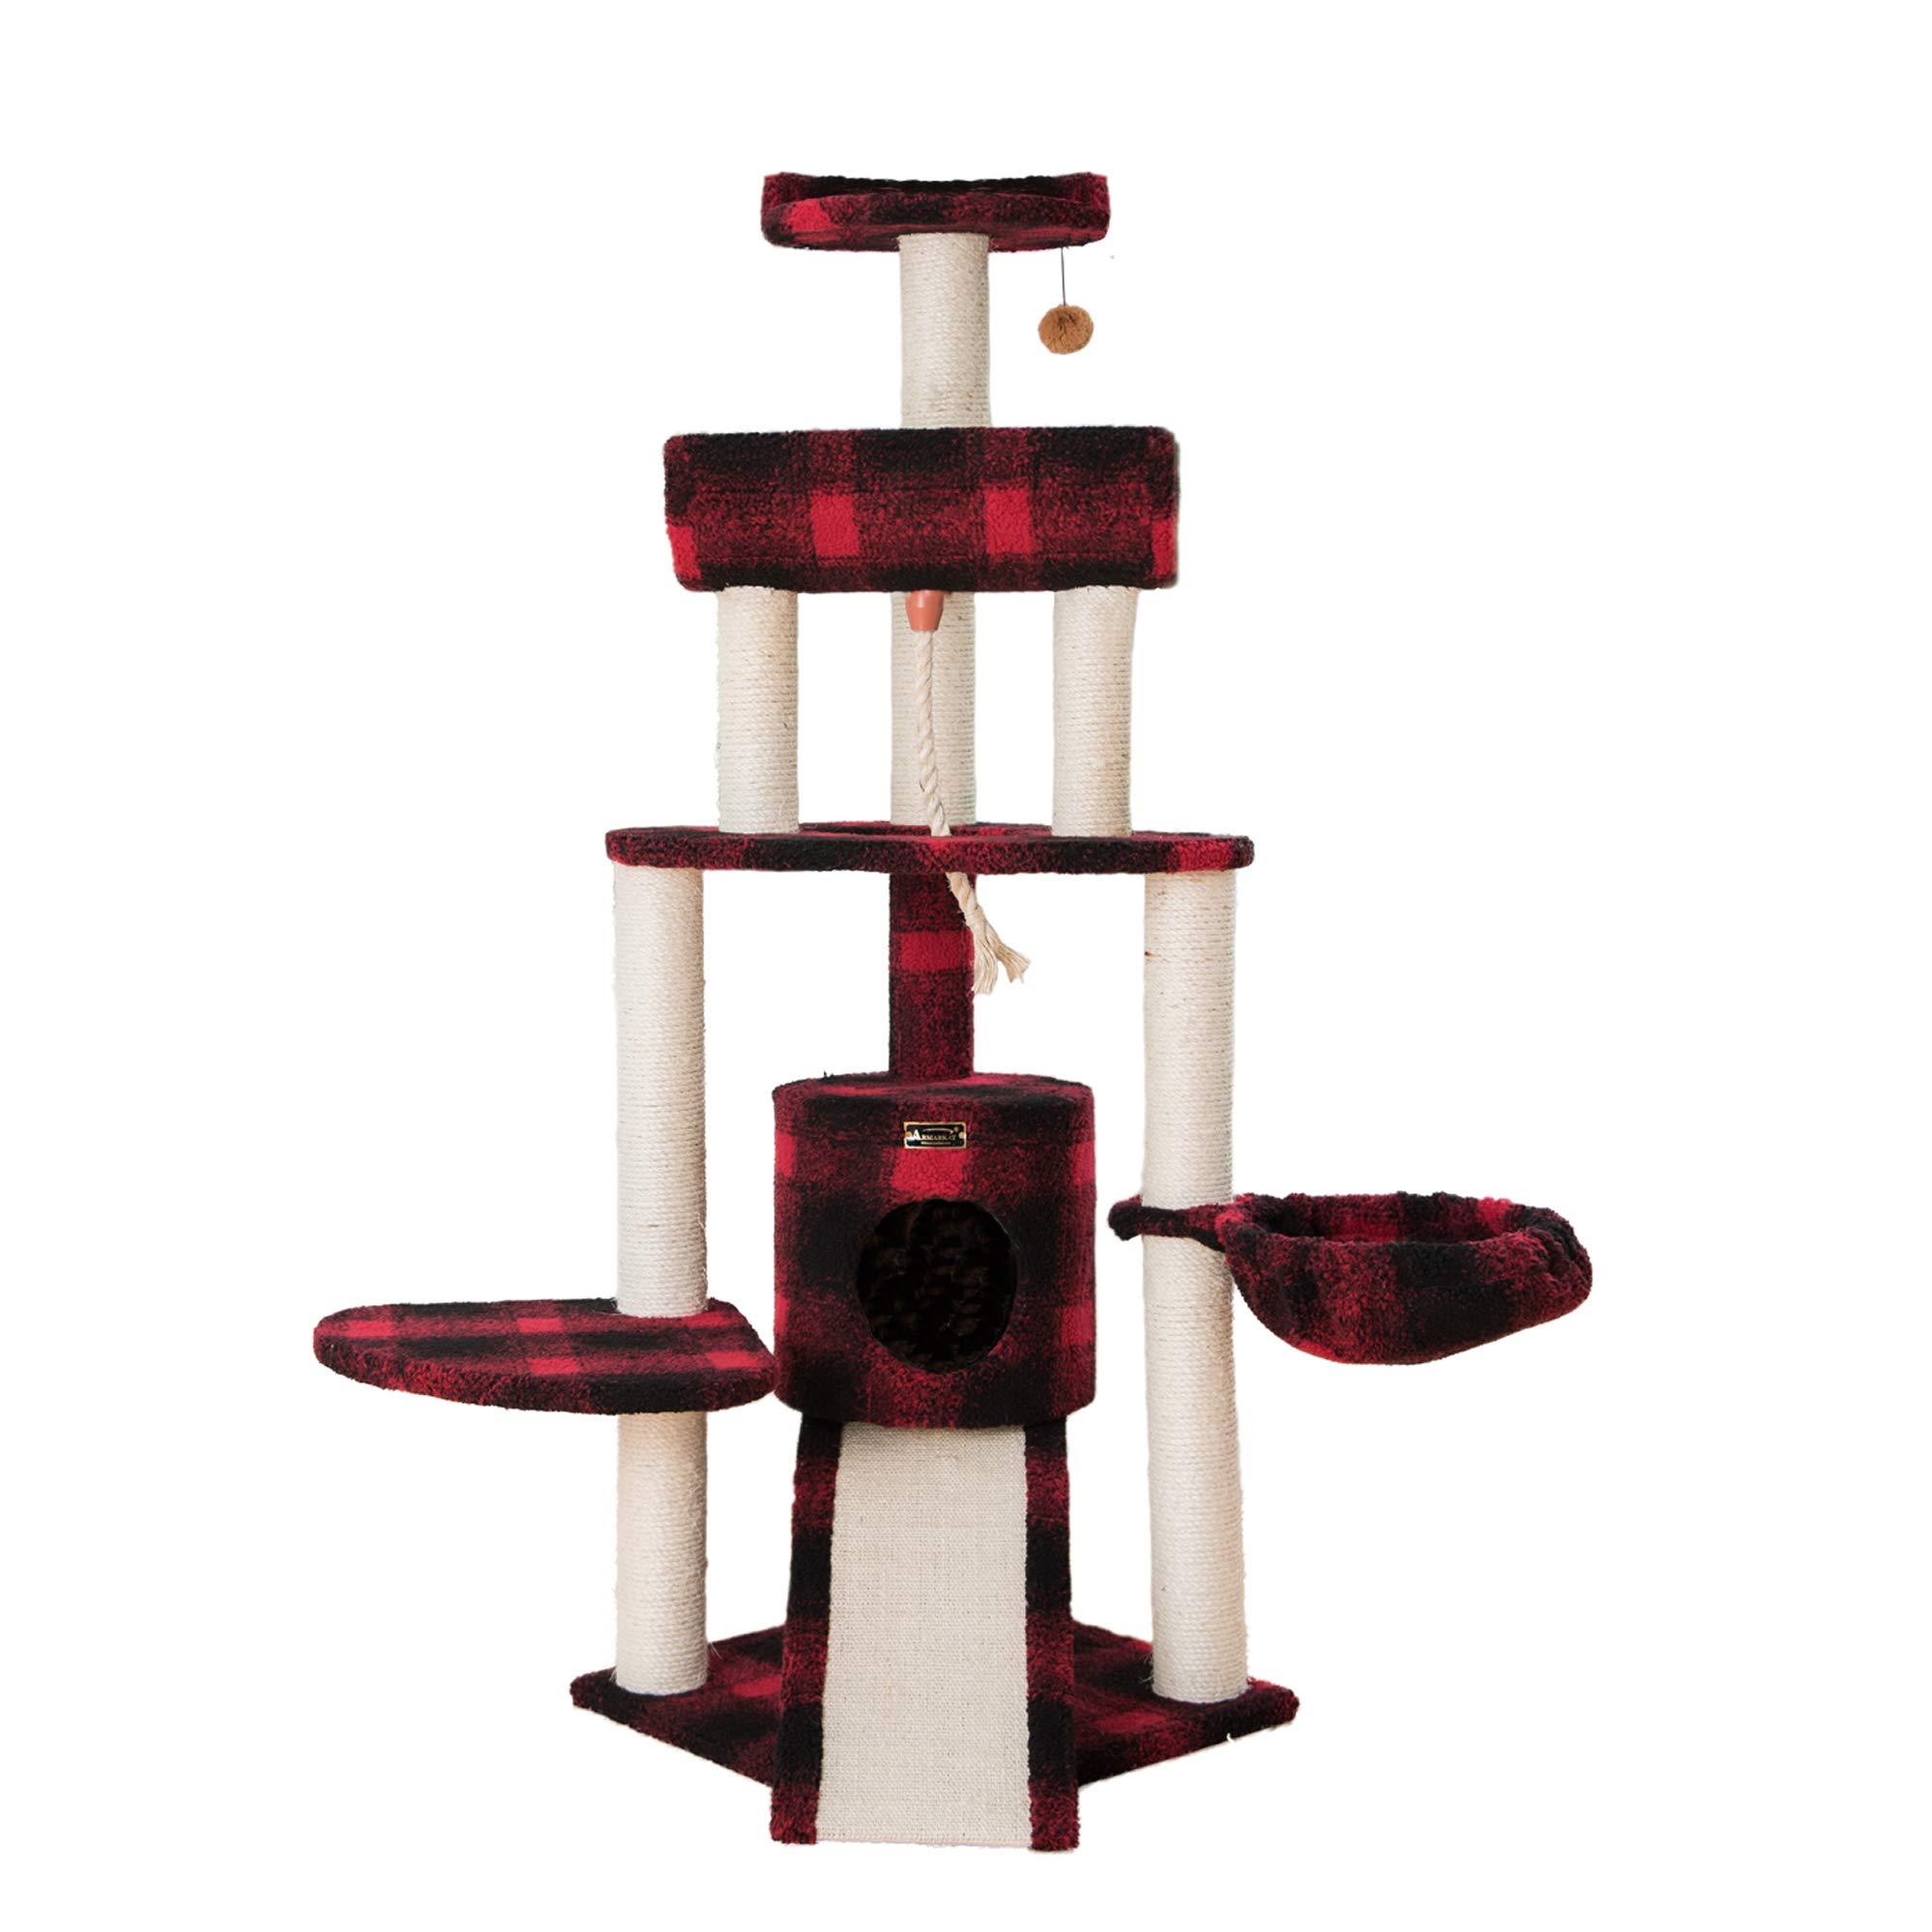 Armarkat B5806 Classic Cat Tree with Multiple Features, Jackson Galaxy Approved, Four Levels Real Wood Furniture